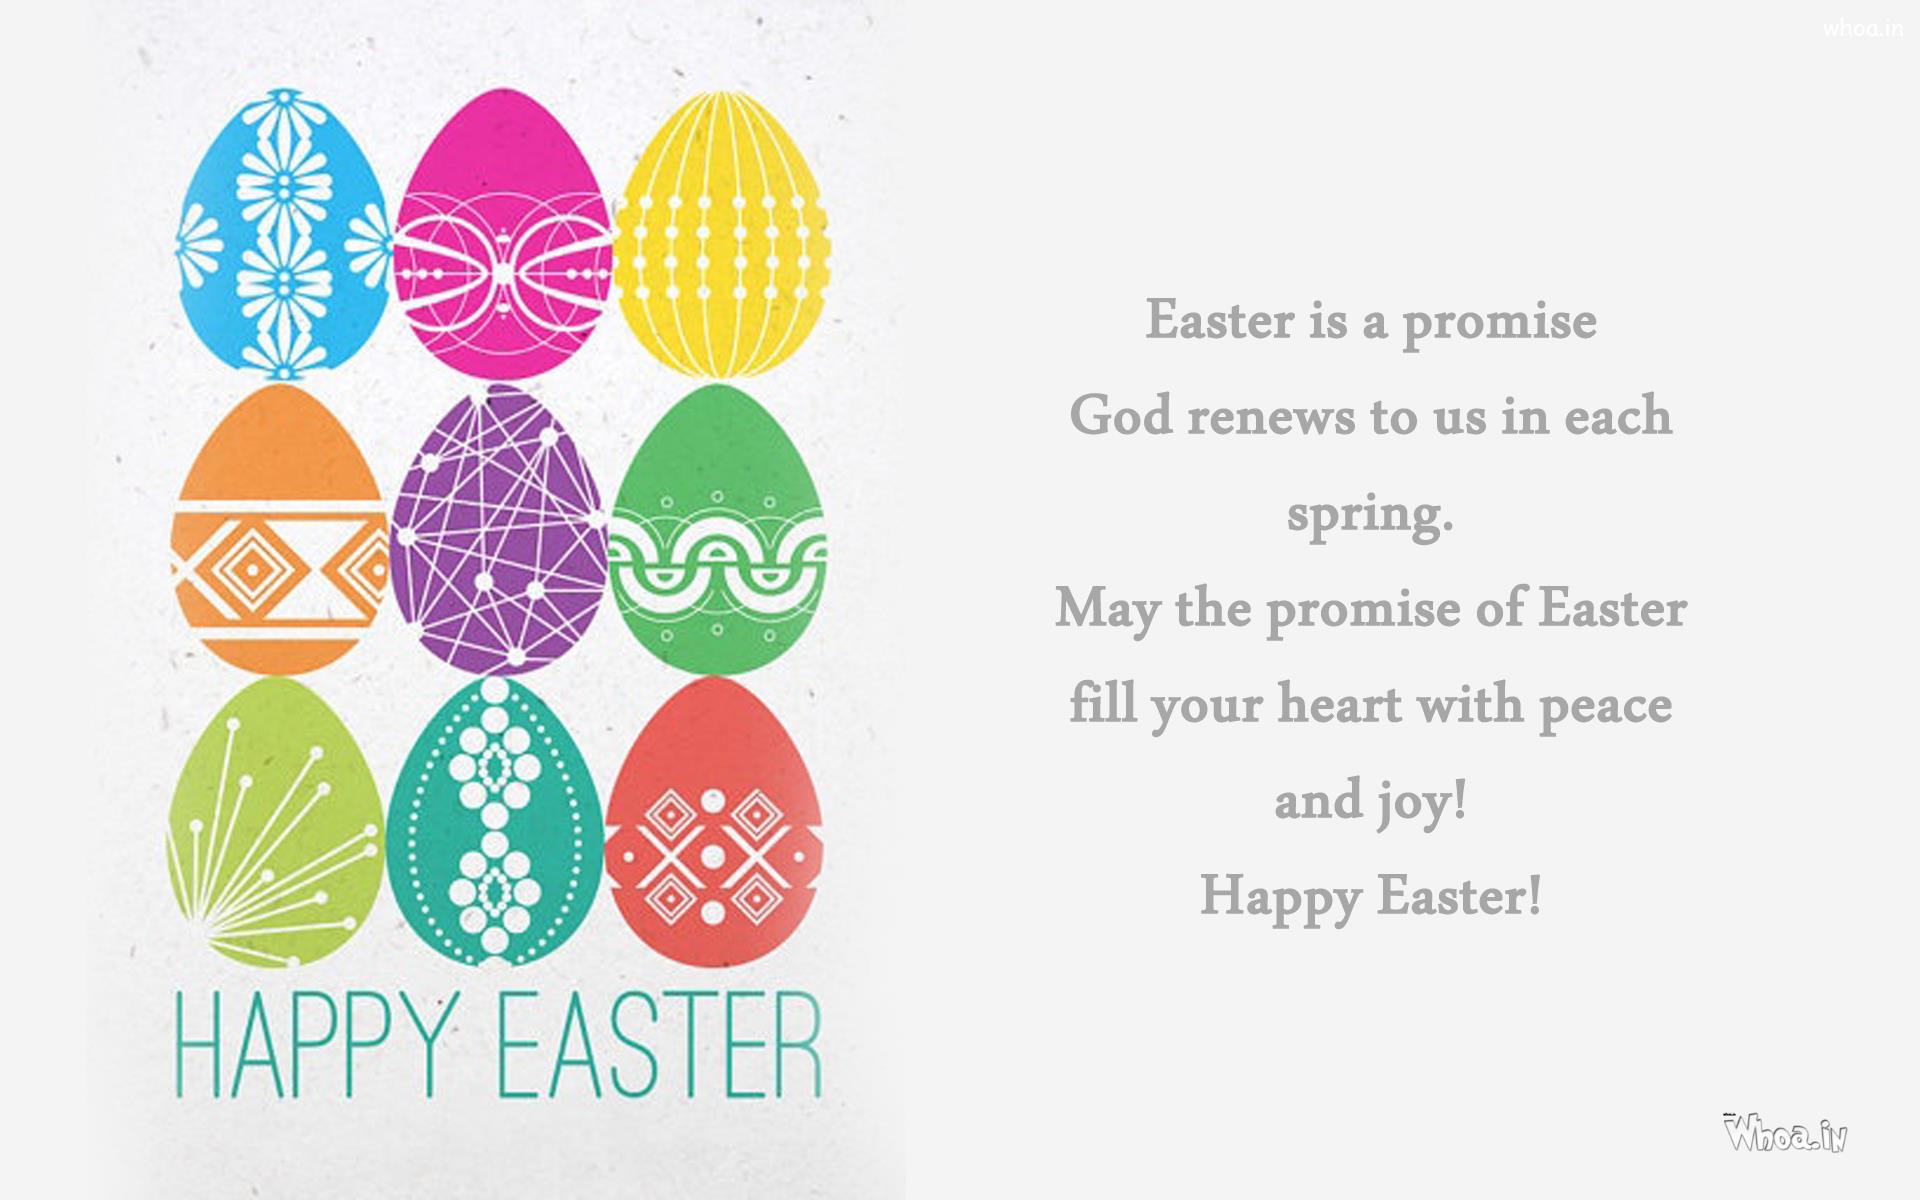 Easter Greetings In White Background And Quote Wallpaper